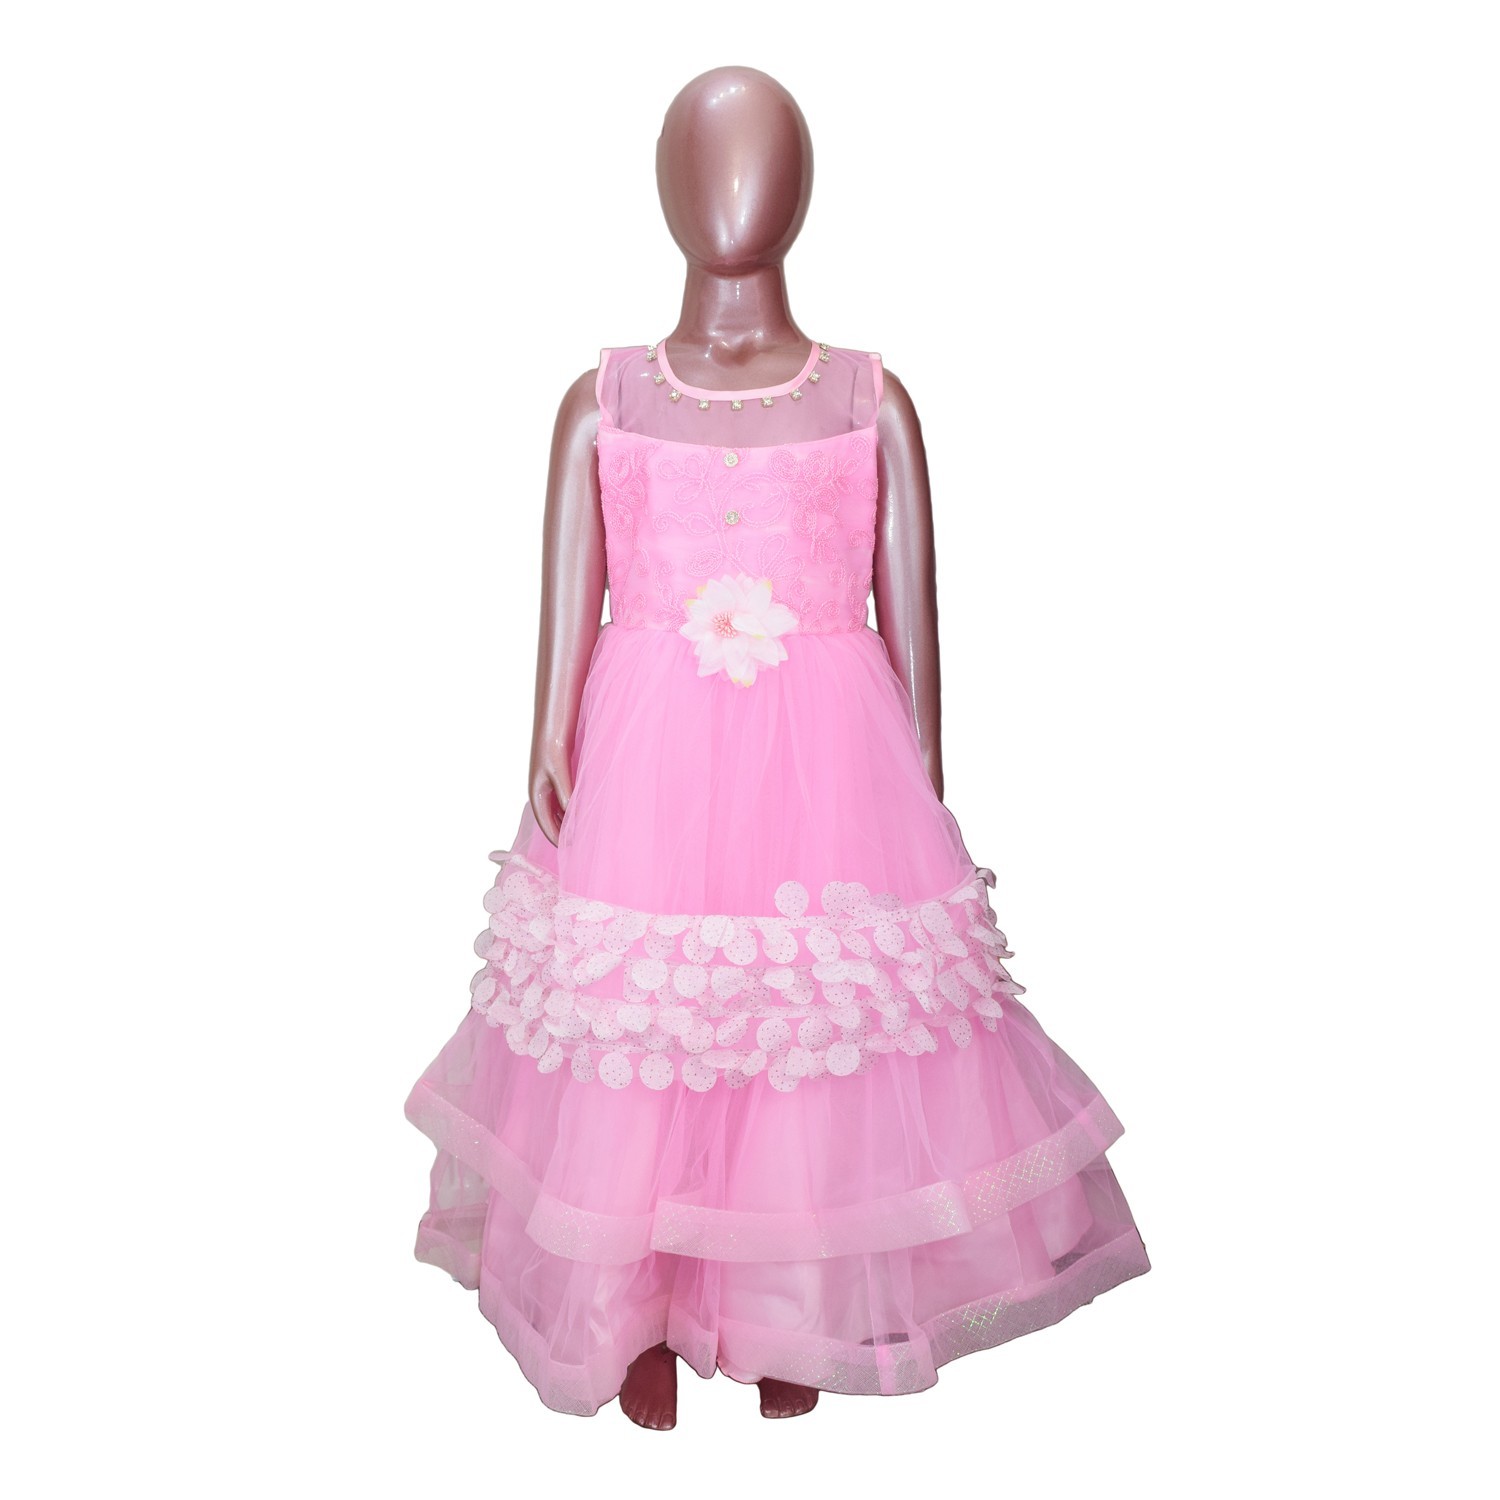 Kids Stylish Pink Sleeveless Party Dress Frock For Girls-DGA121 1